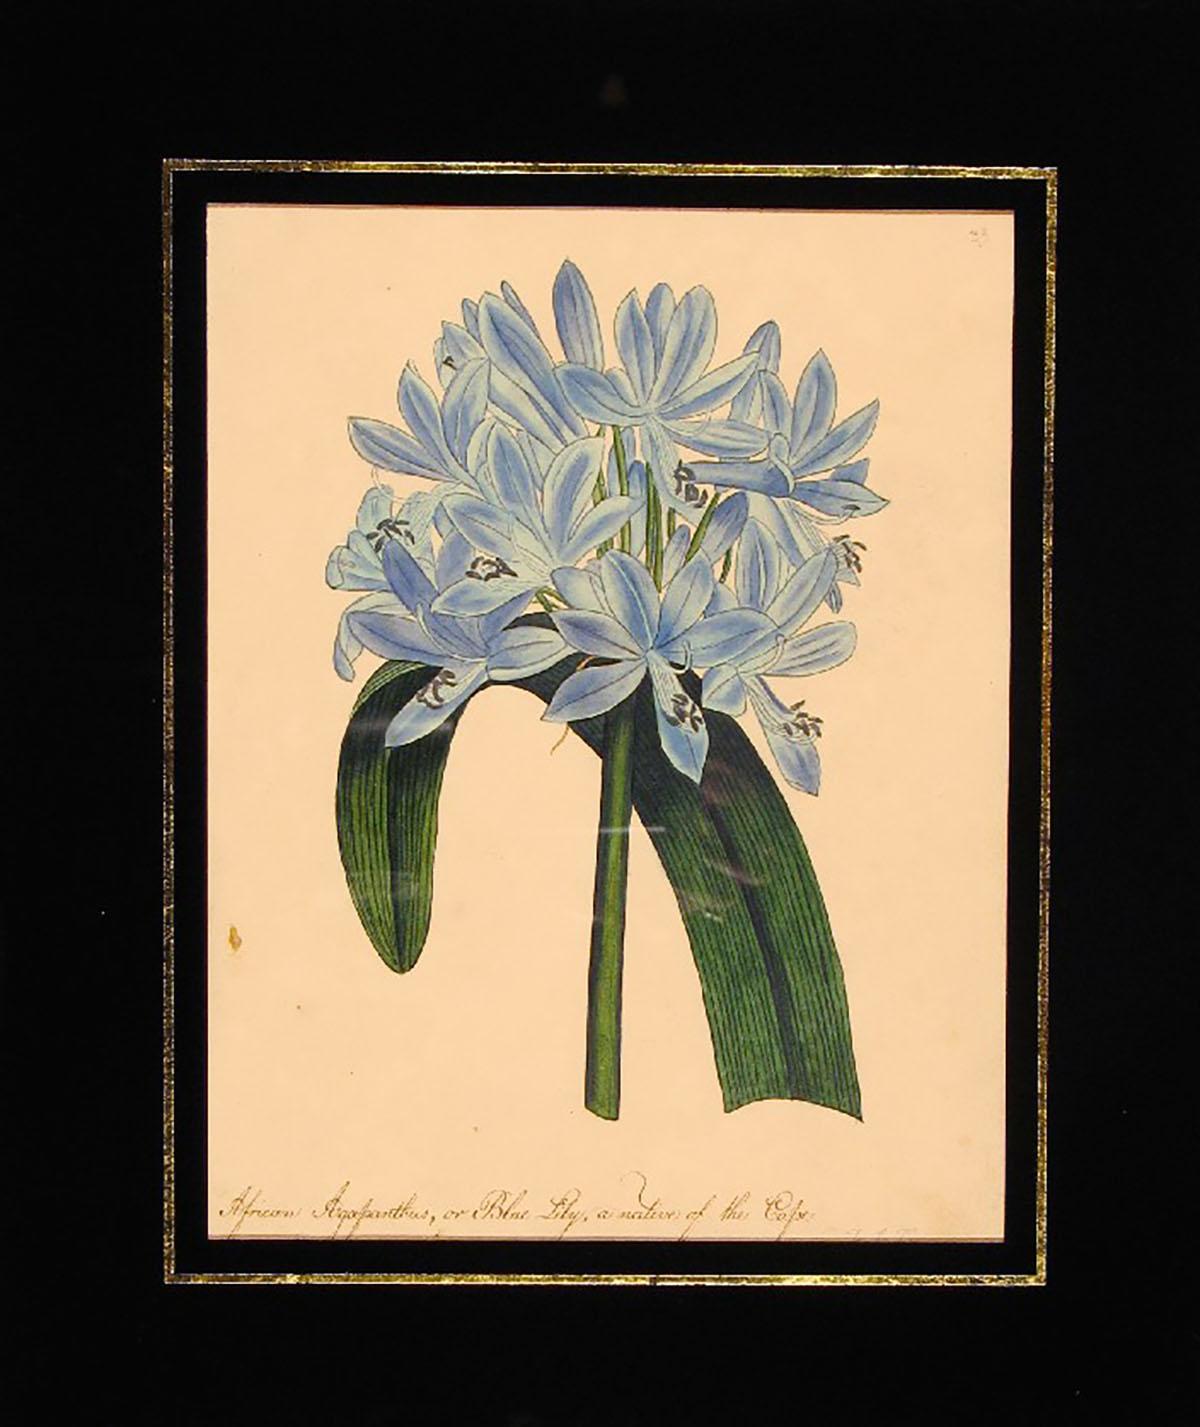 African Agapanthus, or Blue Lily, a native of the Cape - Art by Frances Jauncey Ketchum